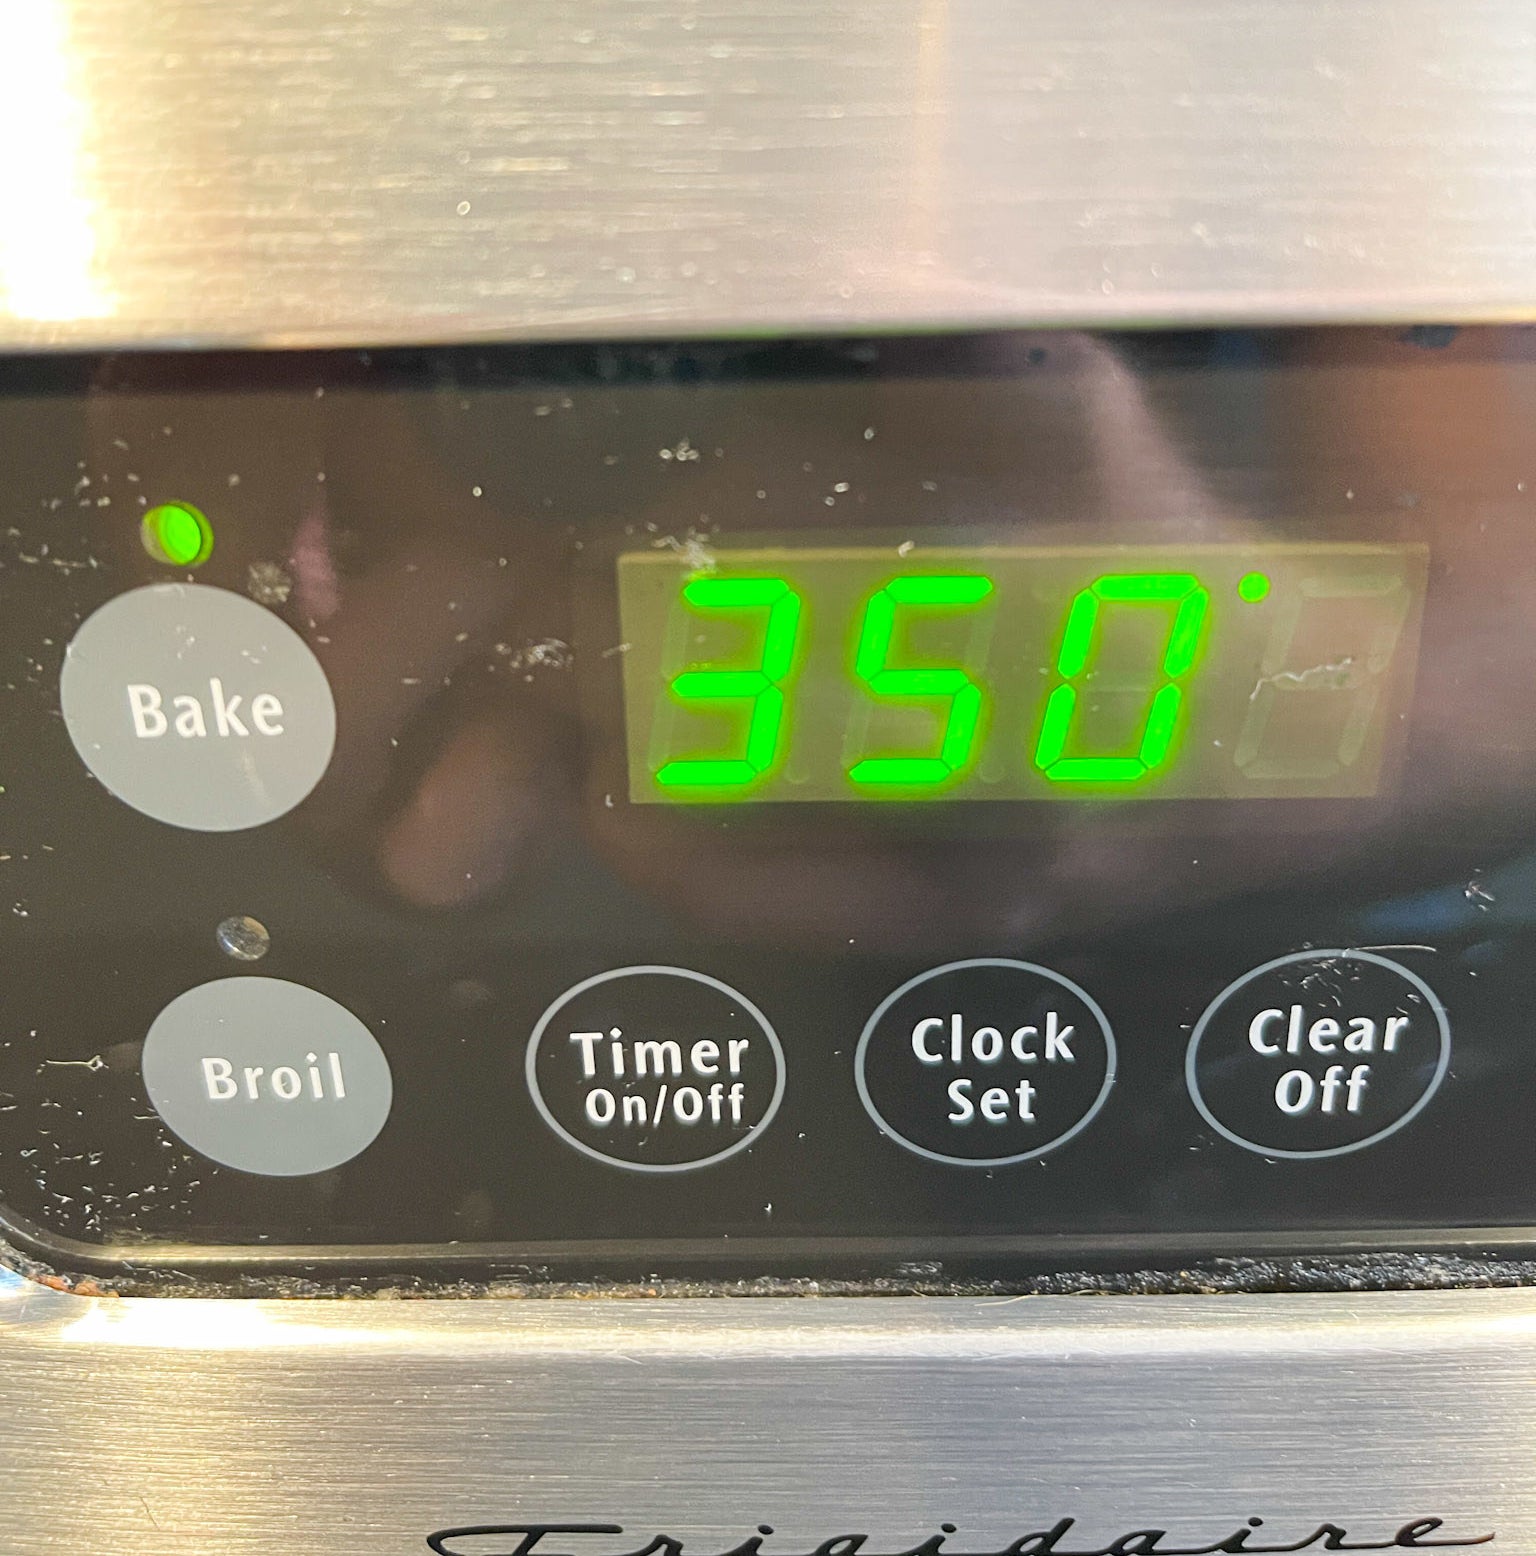 350 degrees on the oven display